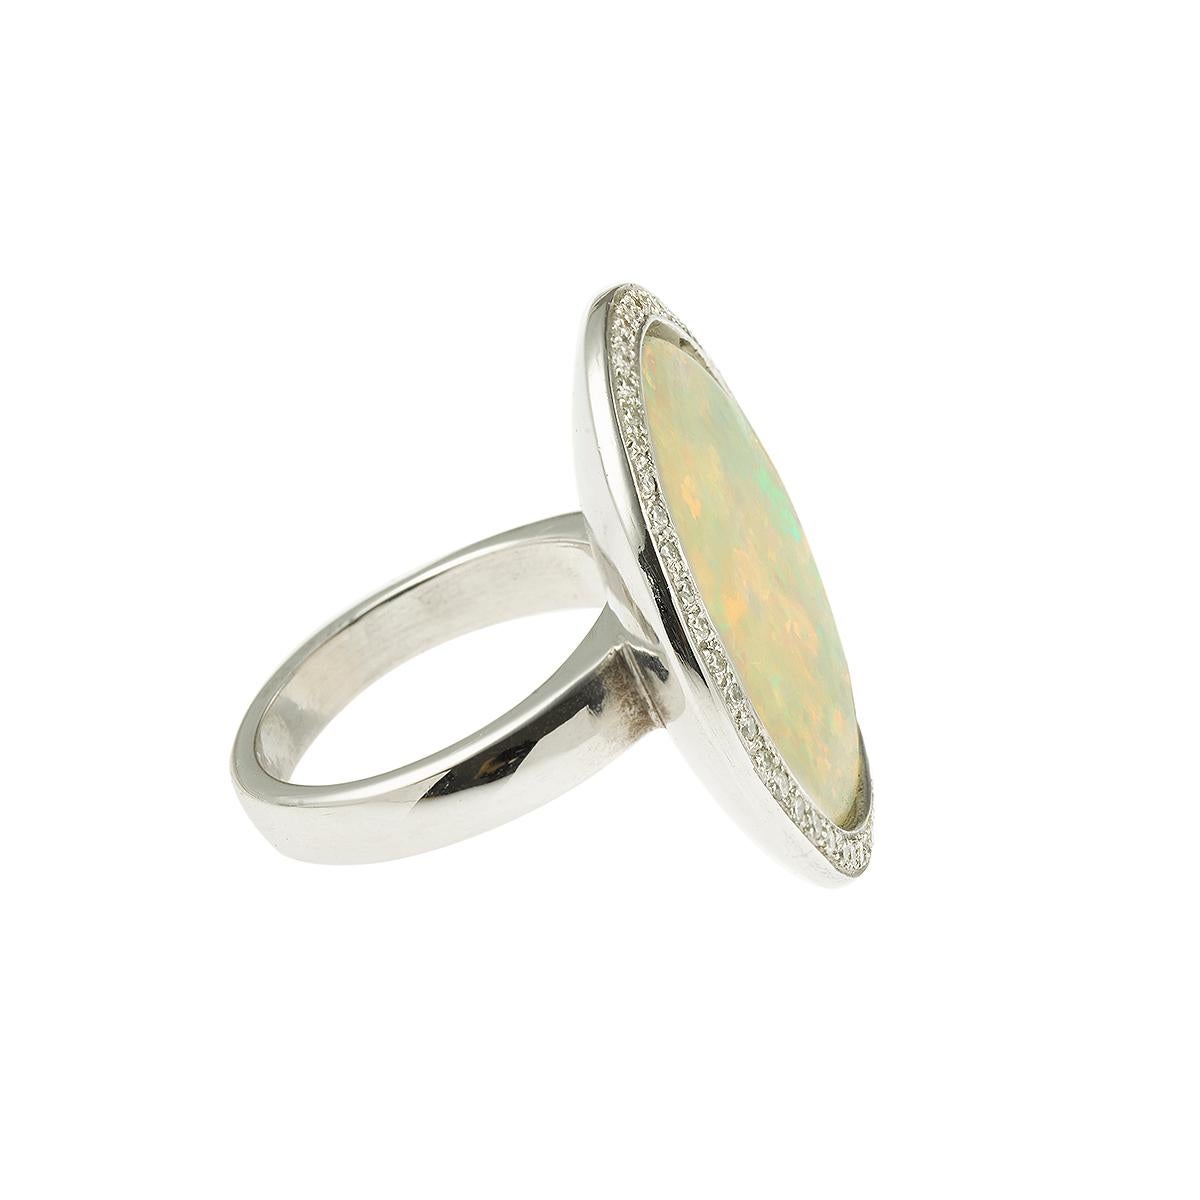 Elegant and rare round opal ring with diamonds on white gold. Unique piece.

Opal weight : 10.22 carats

Origin : Ethiopia

Total weight of the diamonds : 0.56 carats

Dimensions : 26 x 26 x 6.90 mm (1 x 1 x 0.27 inch)

Finger size : 52 (US :